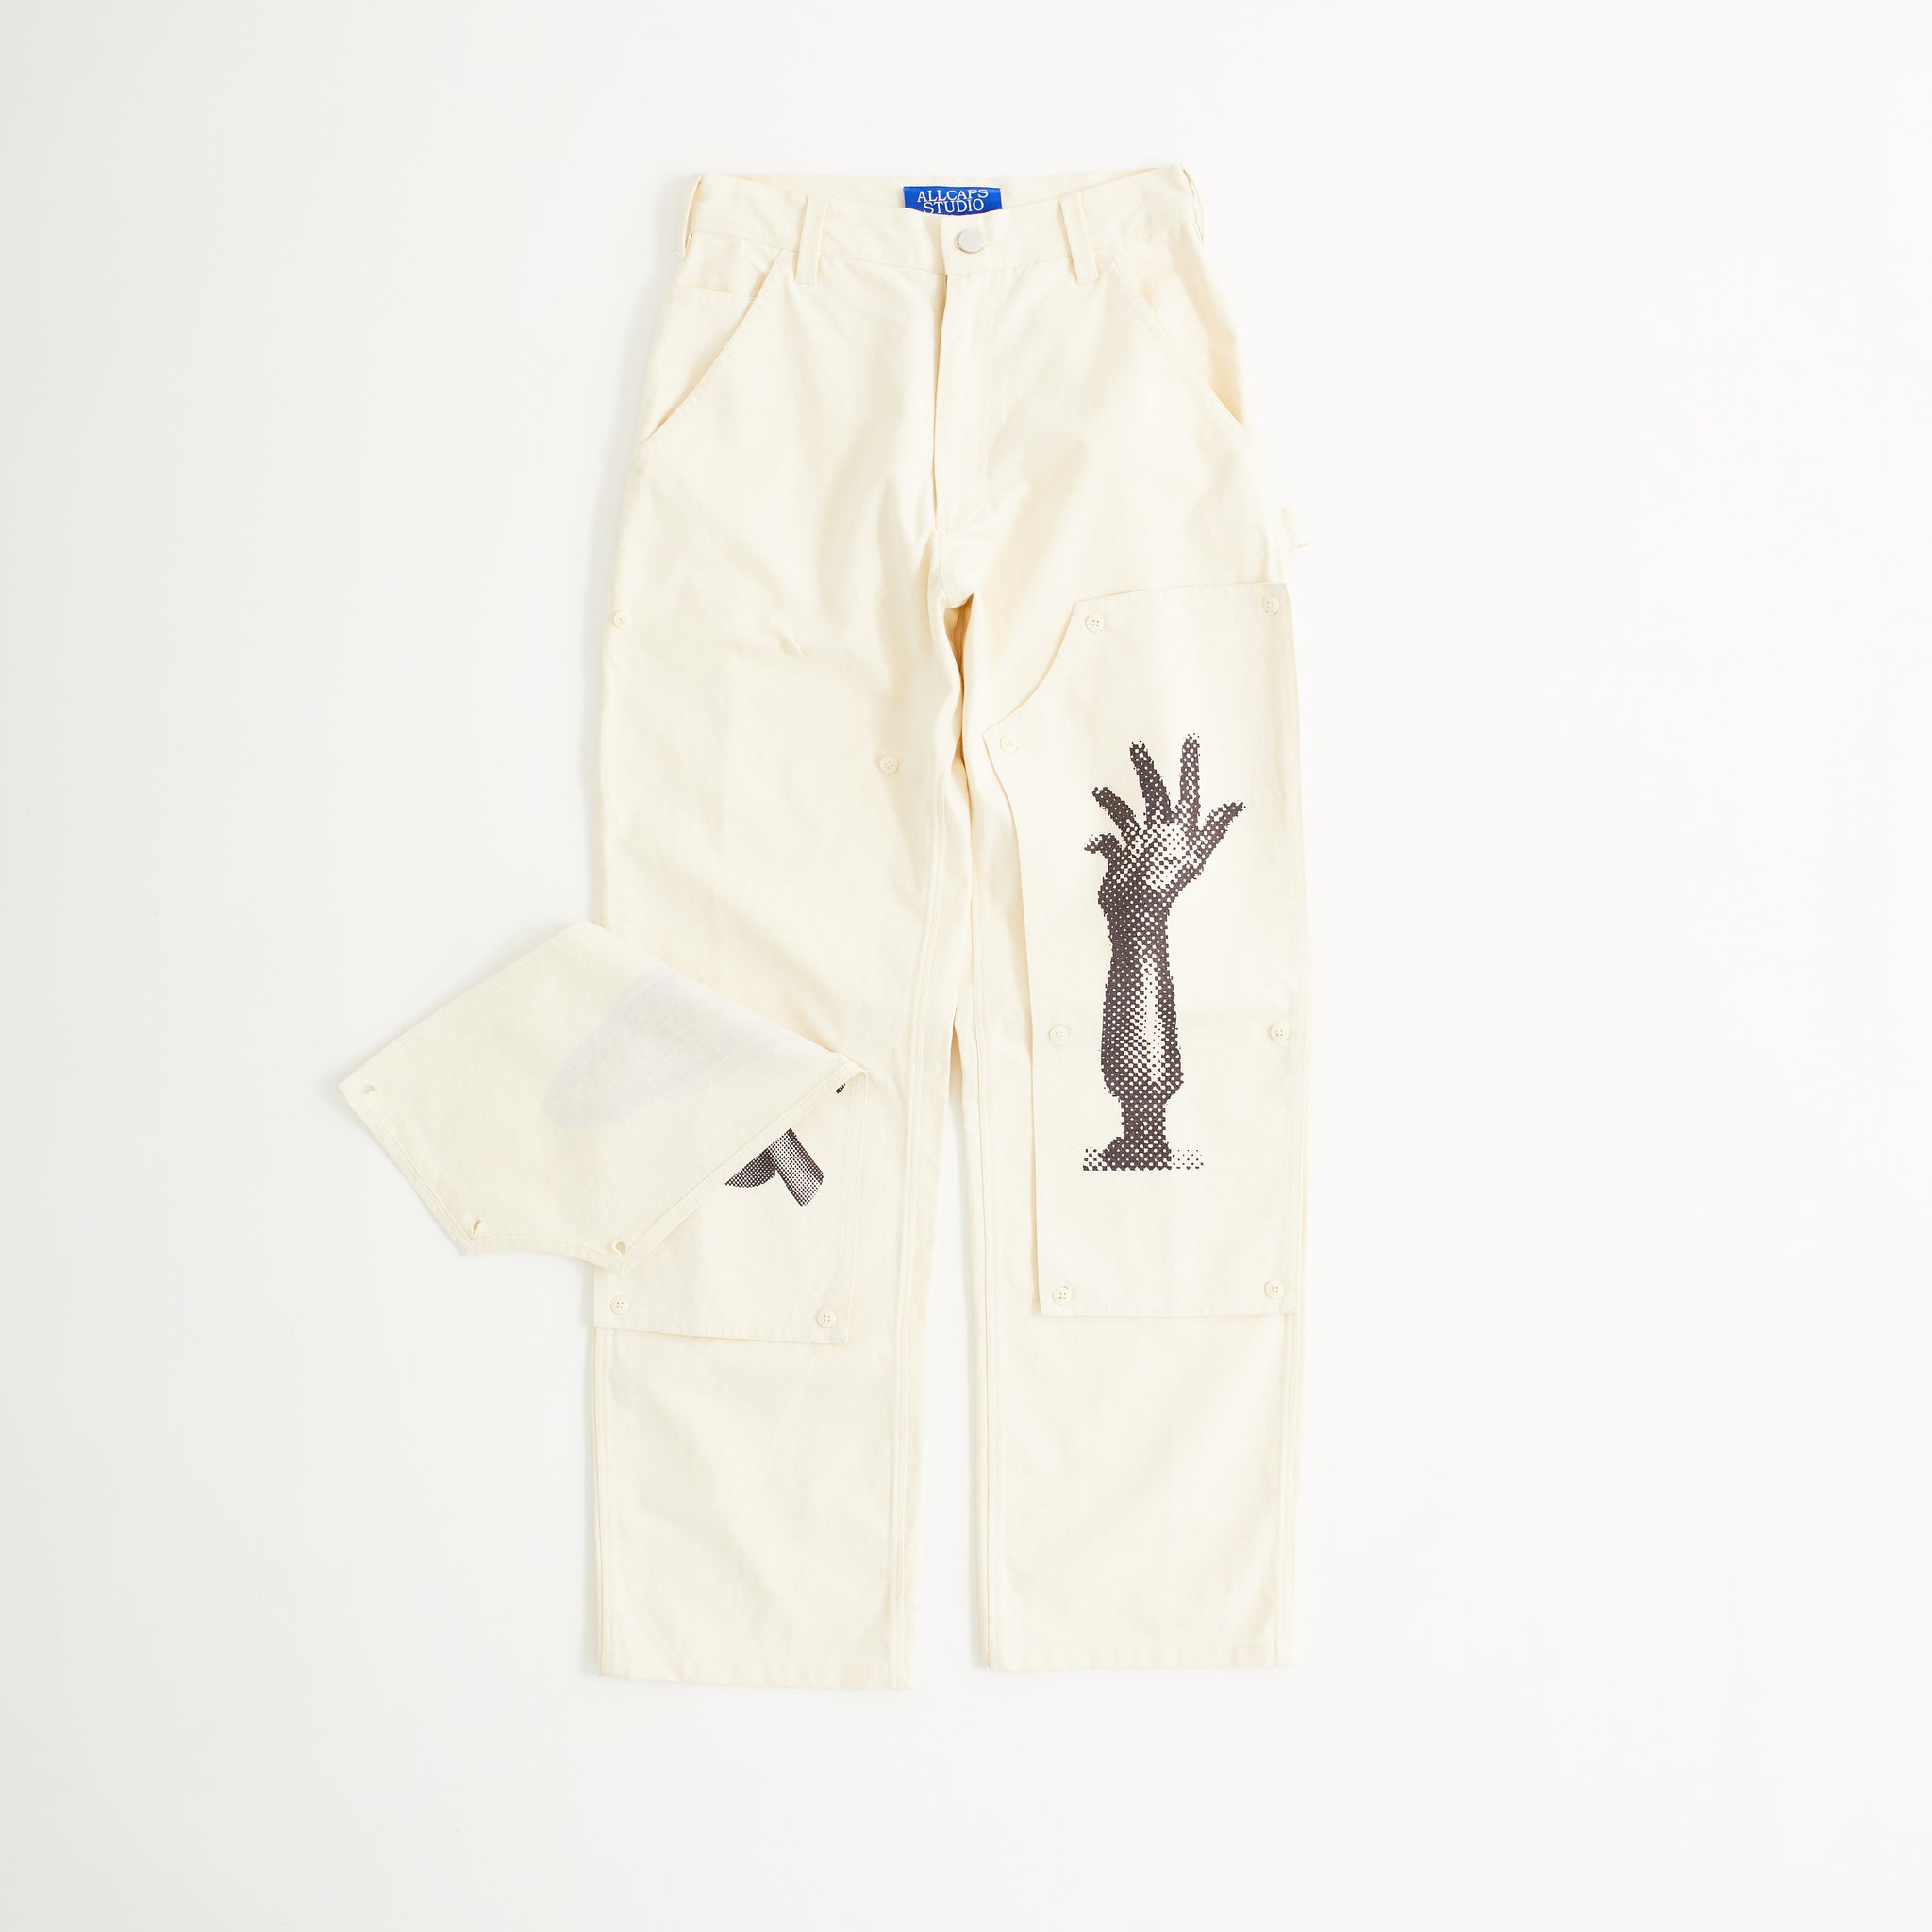 Architecture Double Knee Pants (Off-White)